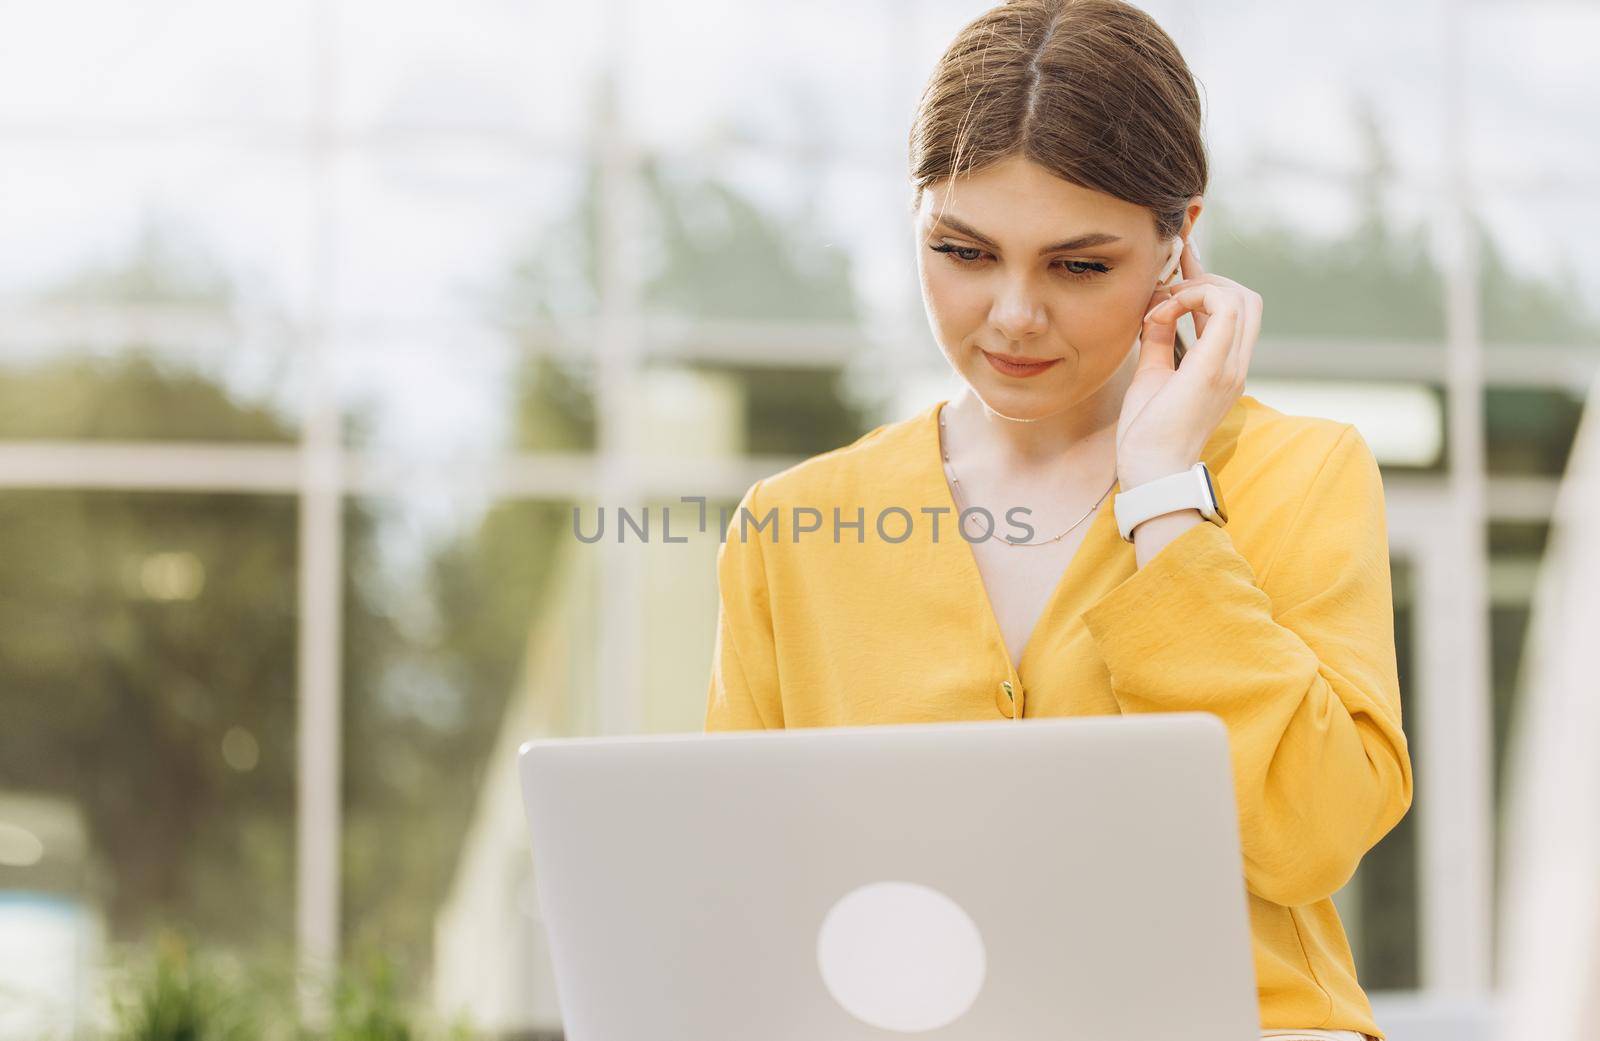 Focused businesswoman using wireless earphones working on laptop computer near modern office. Female manager typing on laptop keyboard. Portrait of smiling business woman looking at laptop screen.